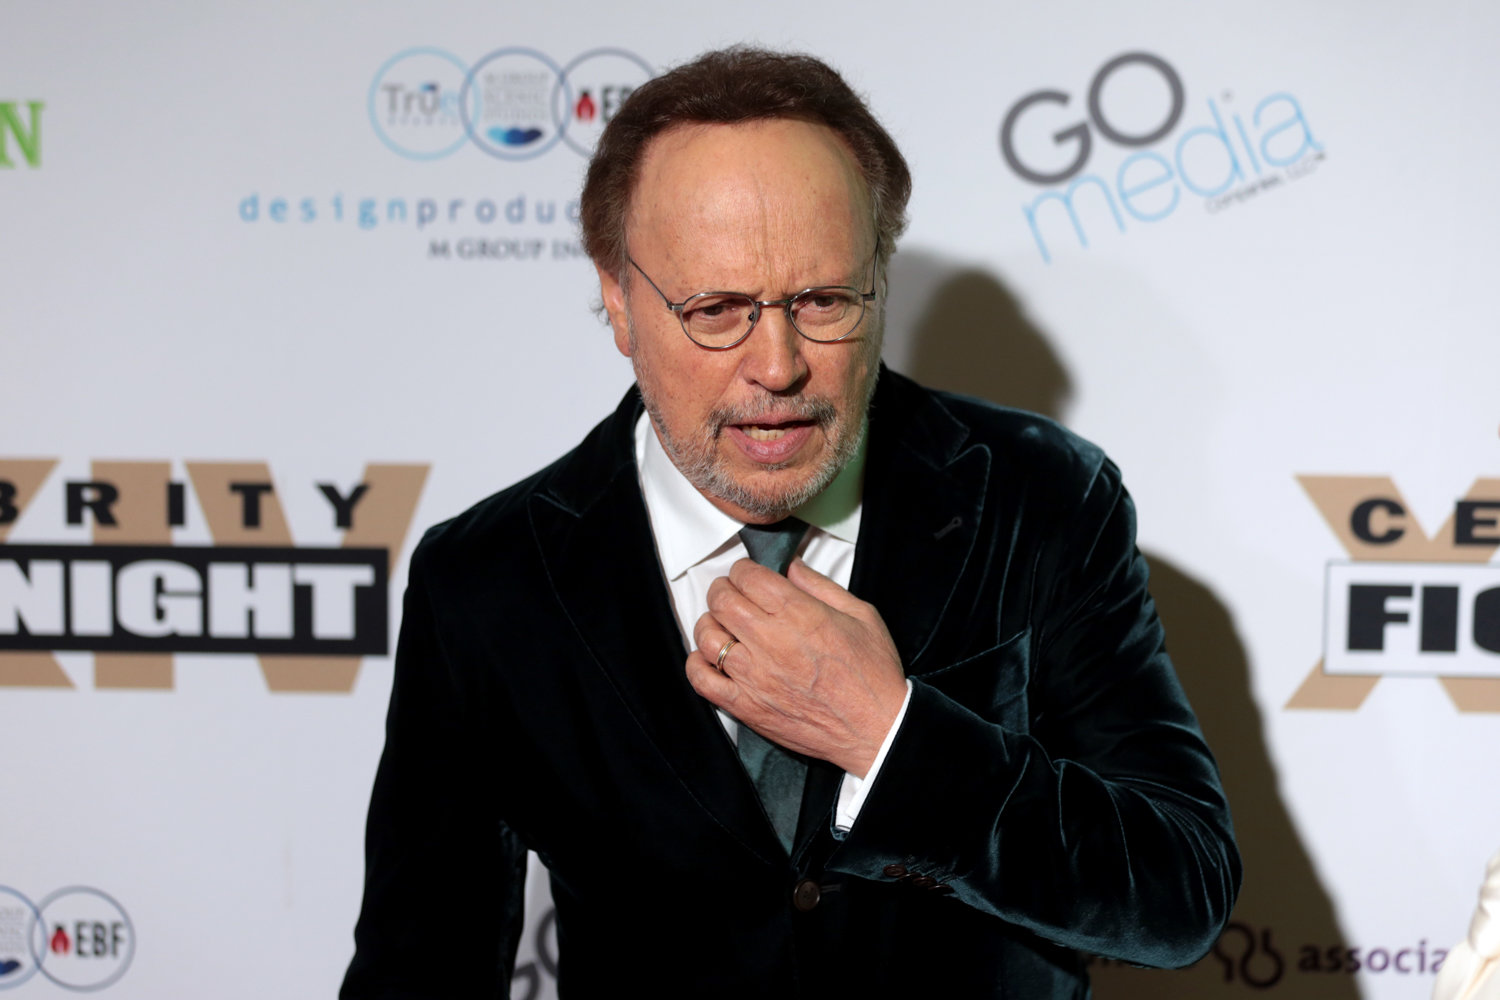 Billy Crystal was one of a handful of celebrities to star in a video for residents at the Hebrew Home at Riverdale. In the video, he plays mahjong at home, and sends his well wishes to Hebrew Home residents.